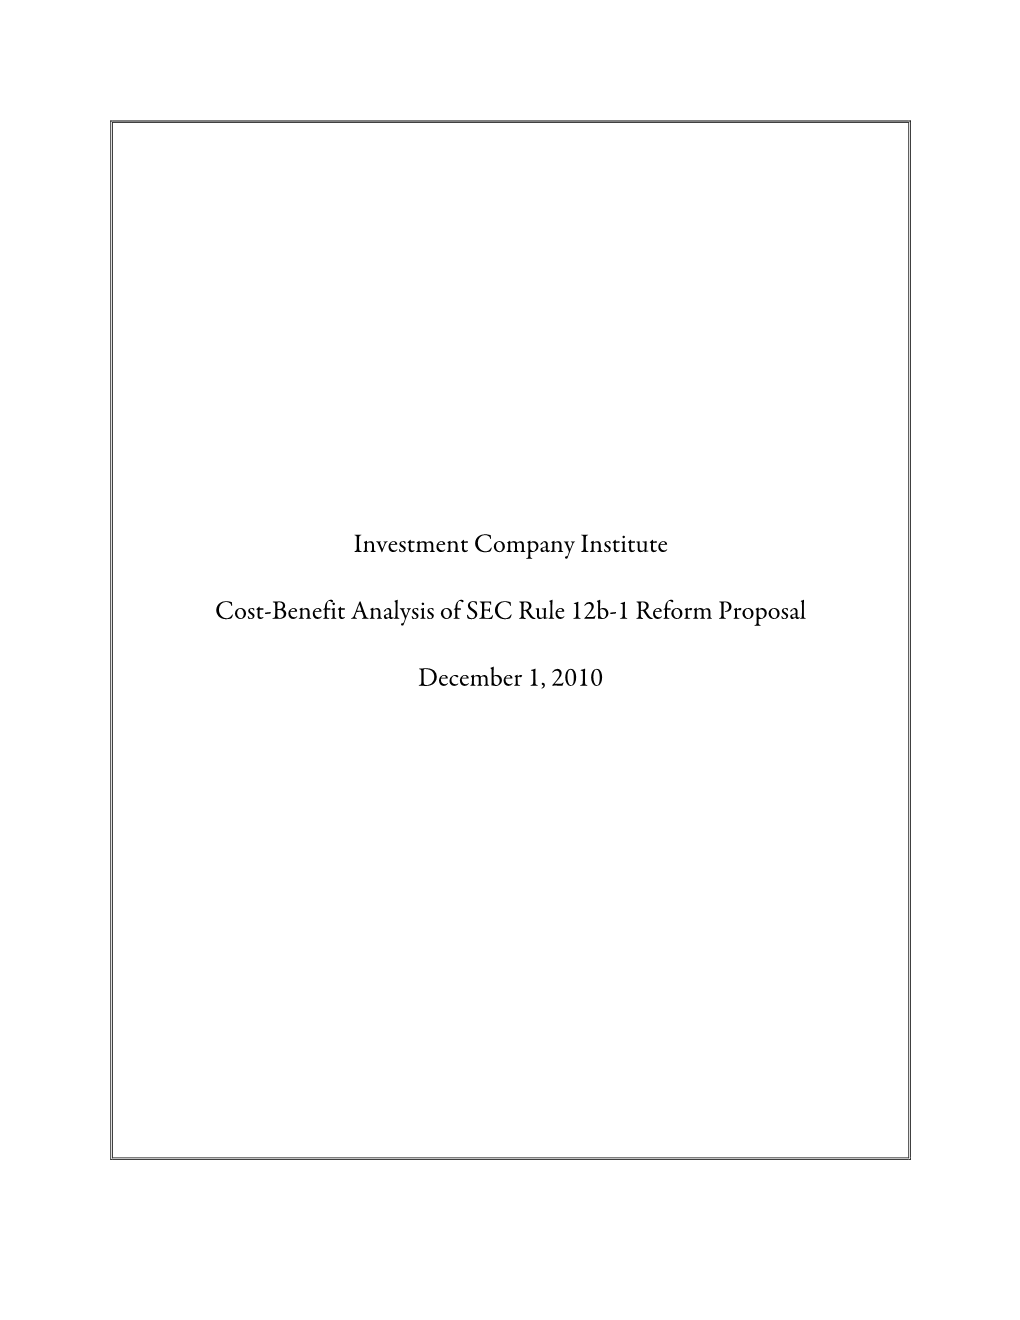 Investment Company Institute Cost-Benefit Analysis of SEC Rule